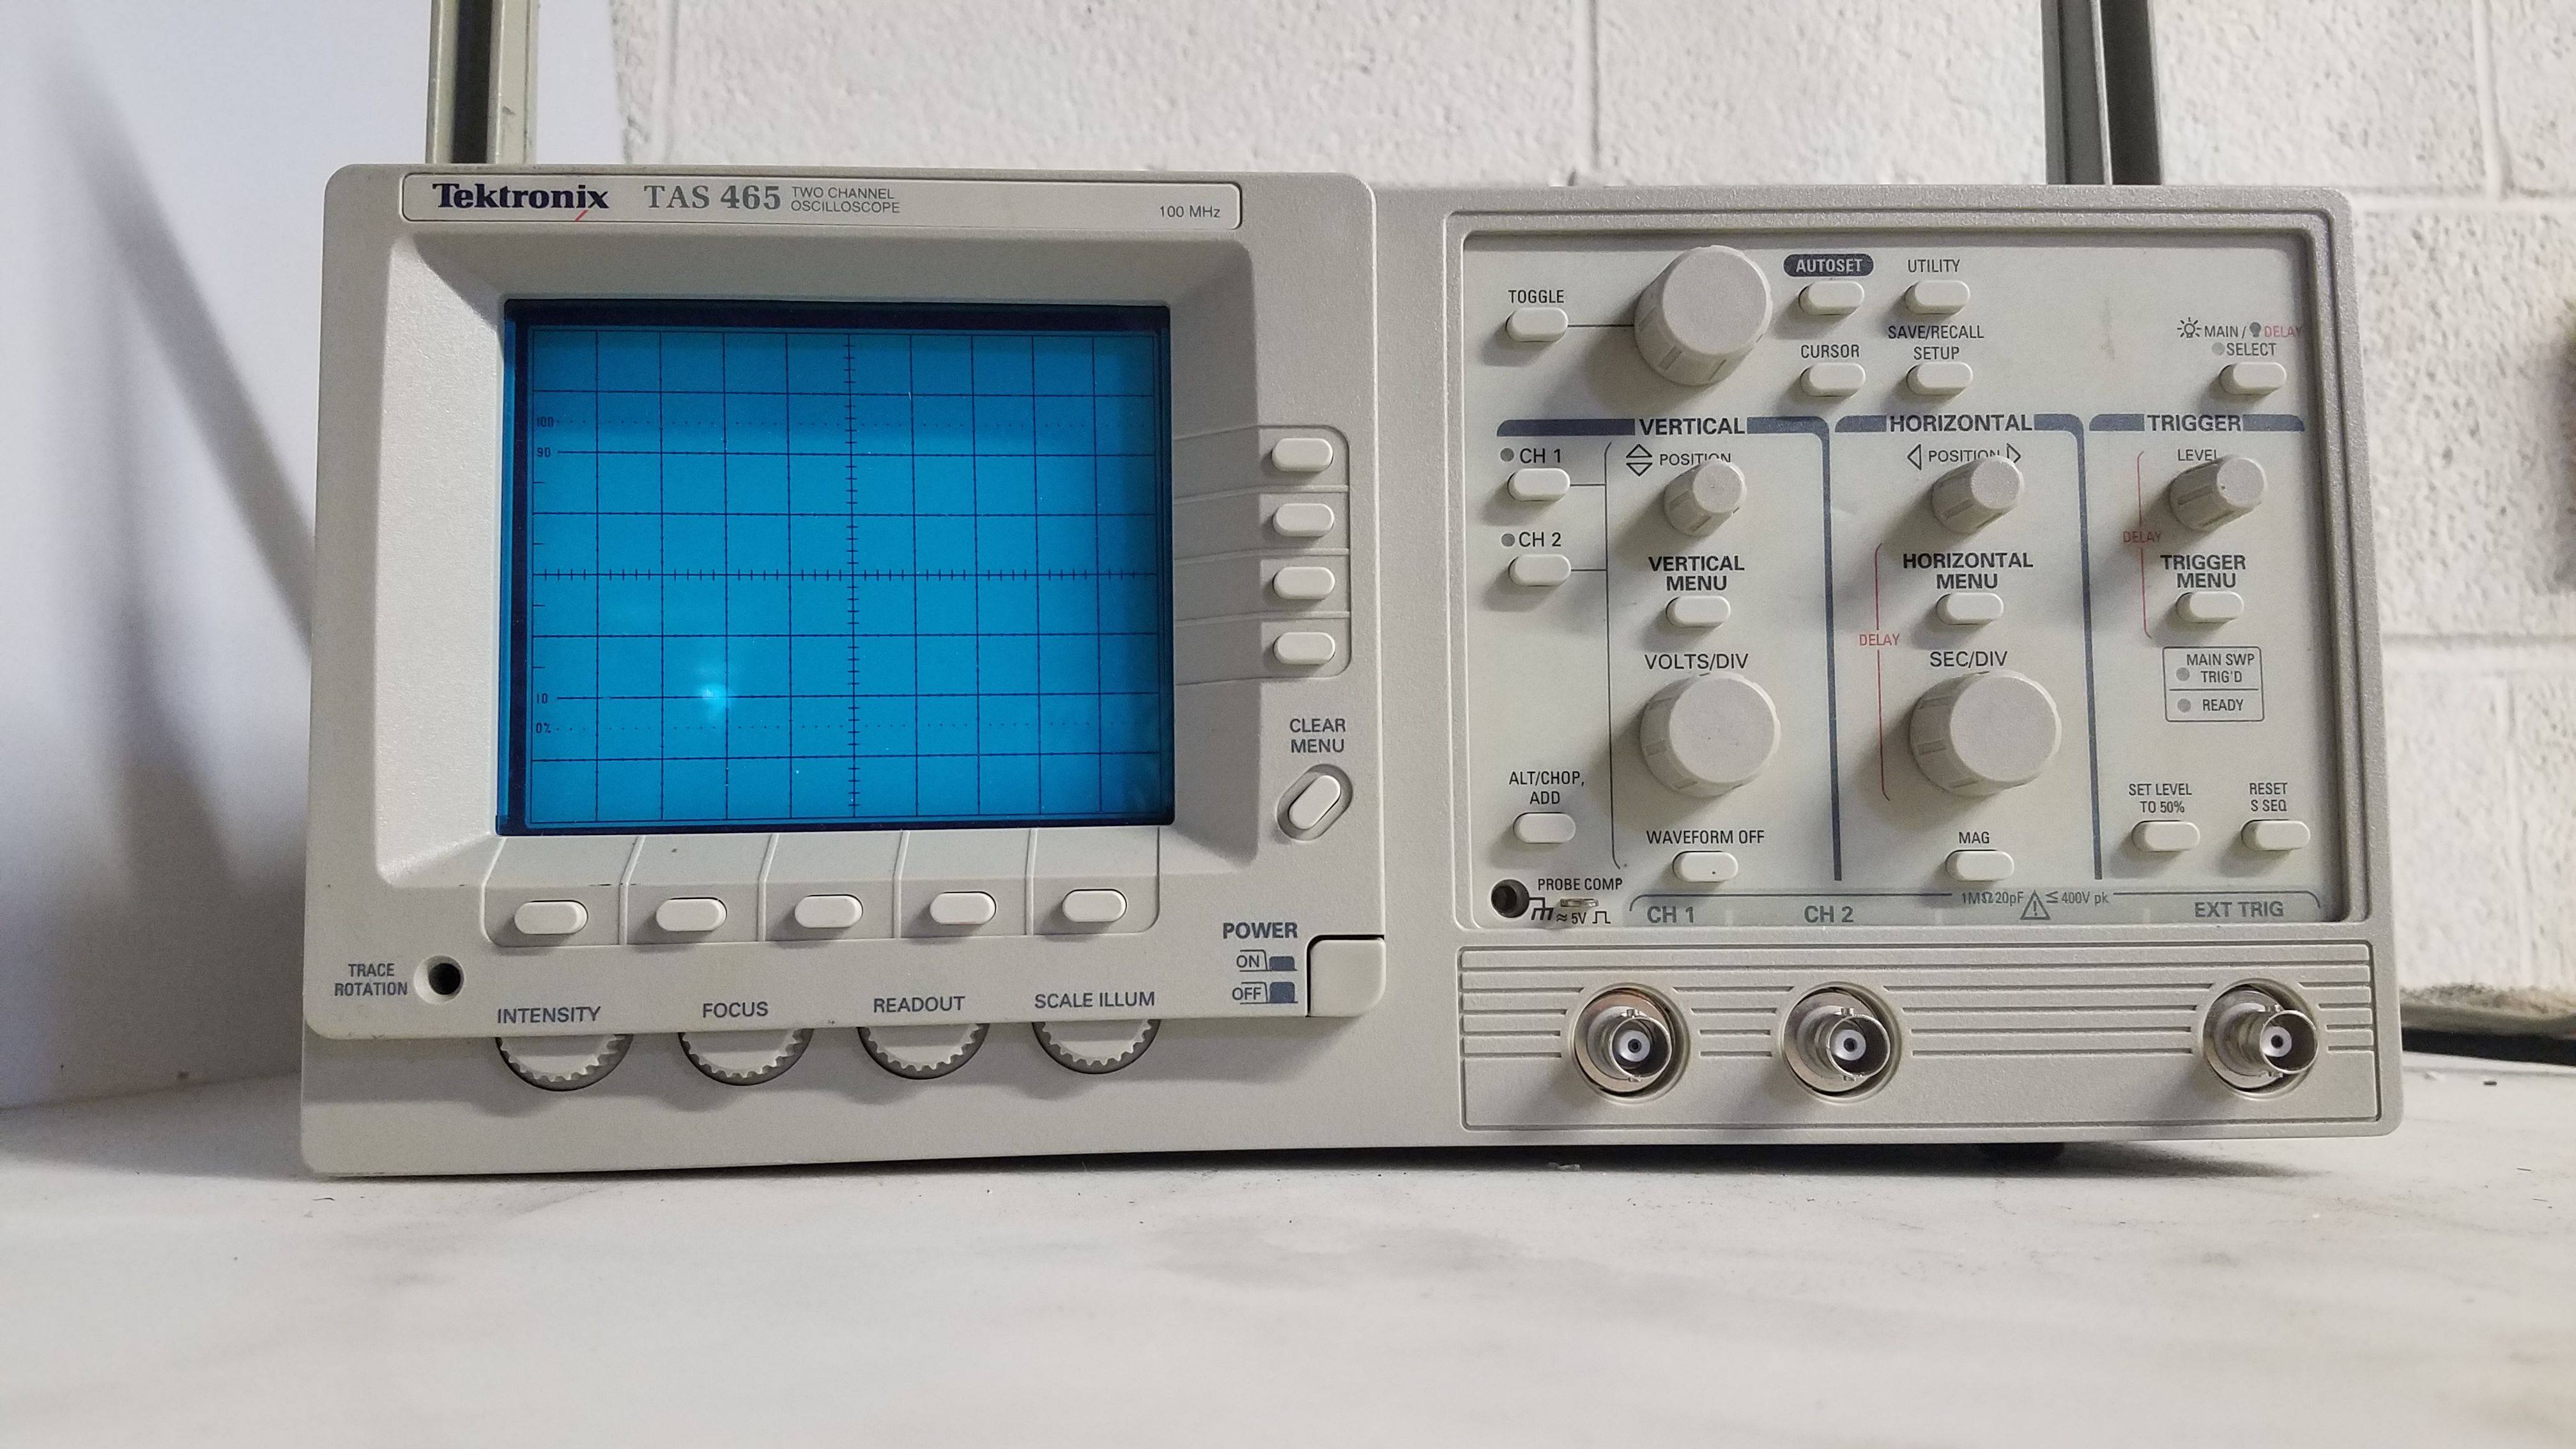 Tektronix TAS465 2 Channel 100mhz Oscilloscope Tested for sale online 